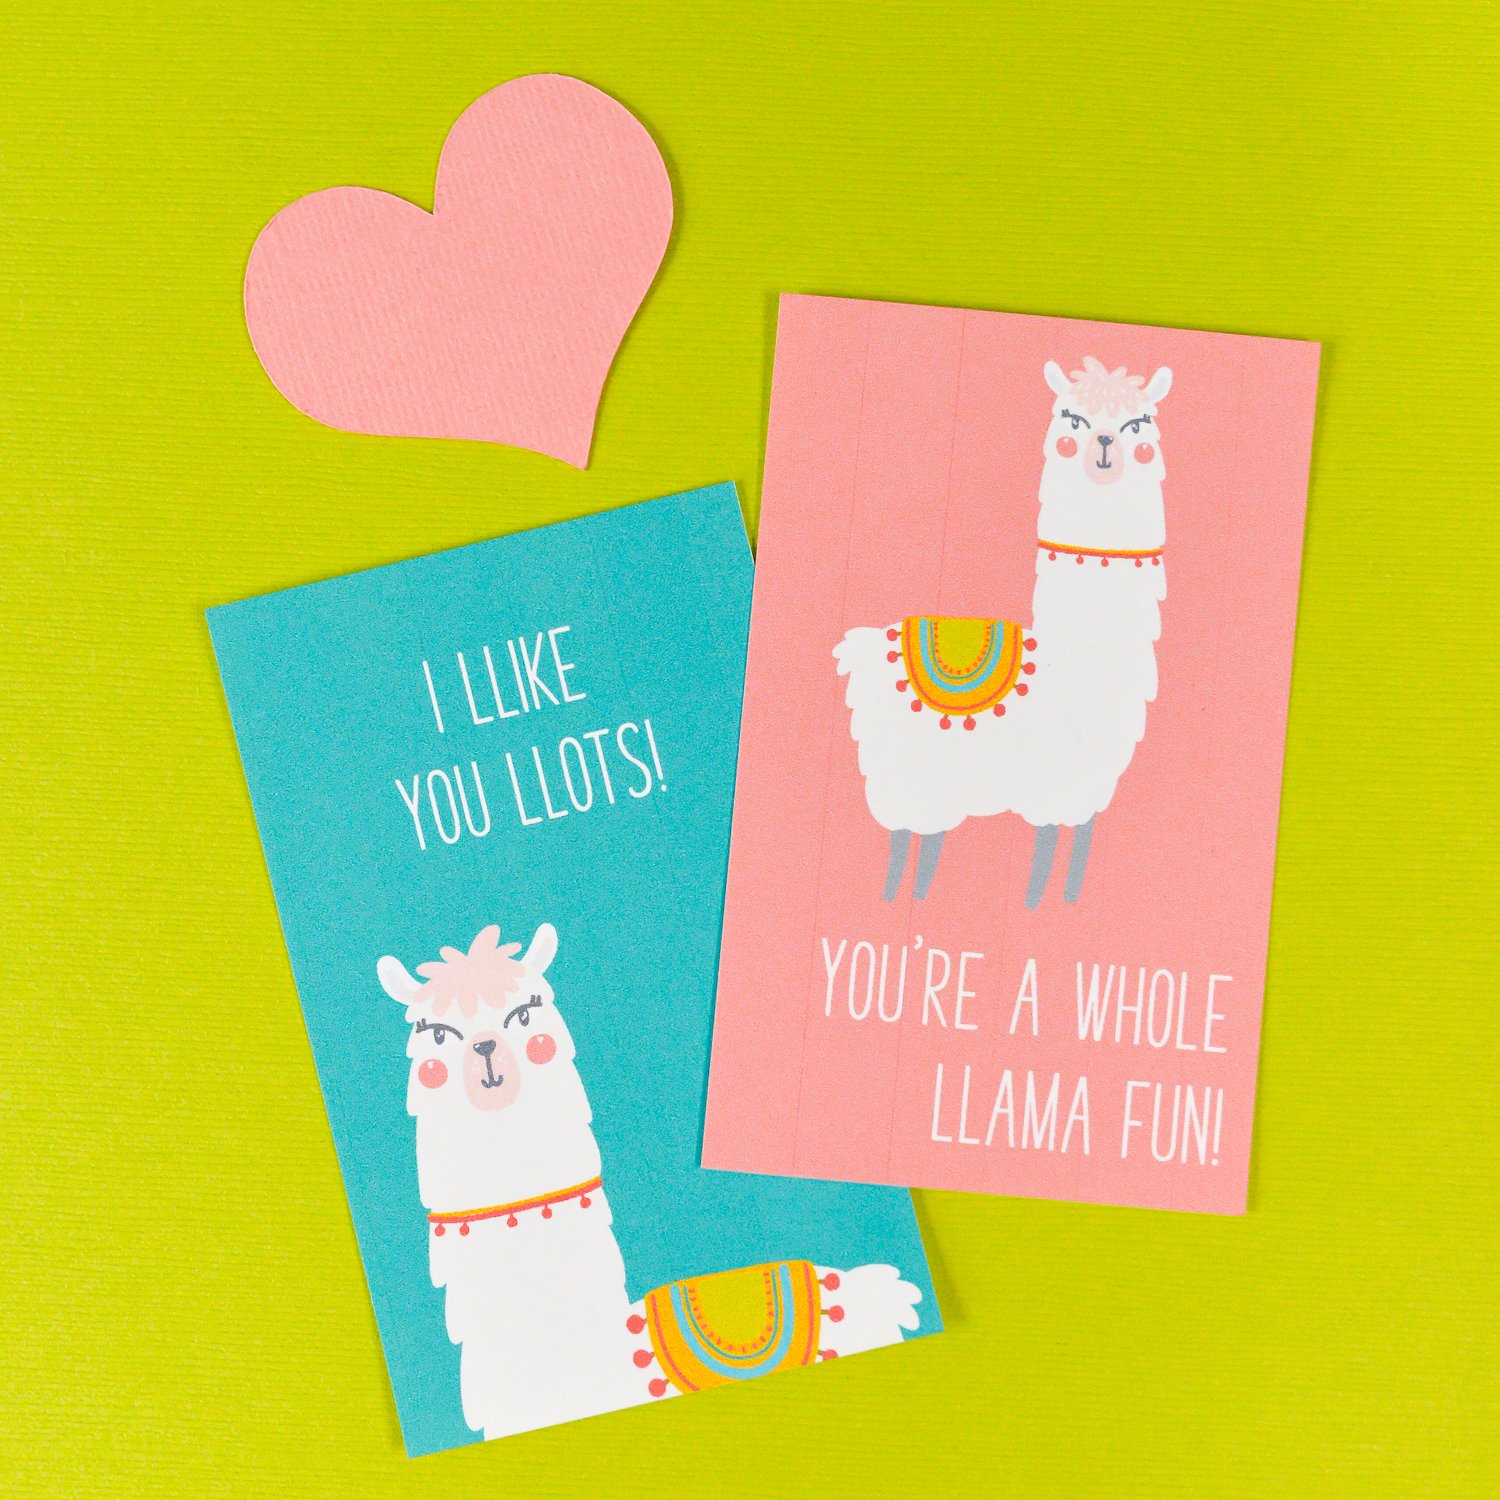 Llama Valentine\'s Day cards that say, \"You\'re a Whole Llama Fun\", and \"I Like You Llots!\"